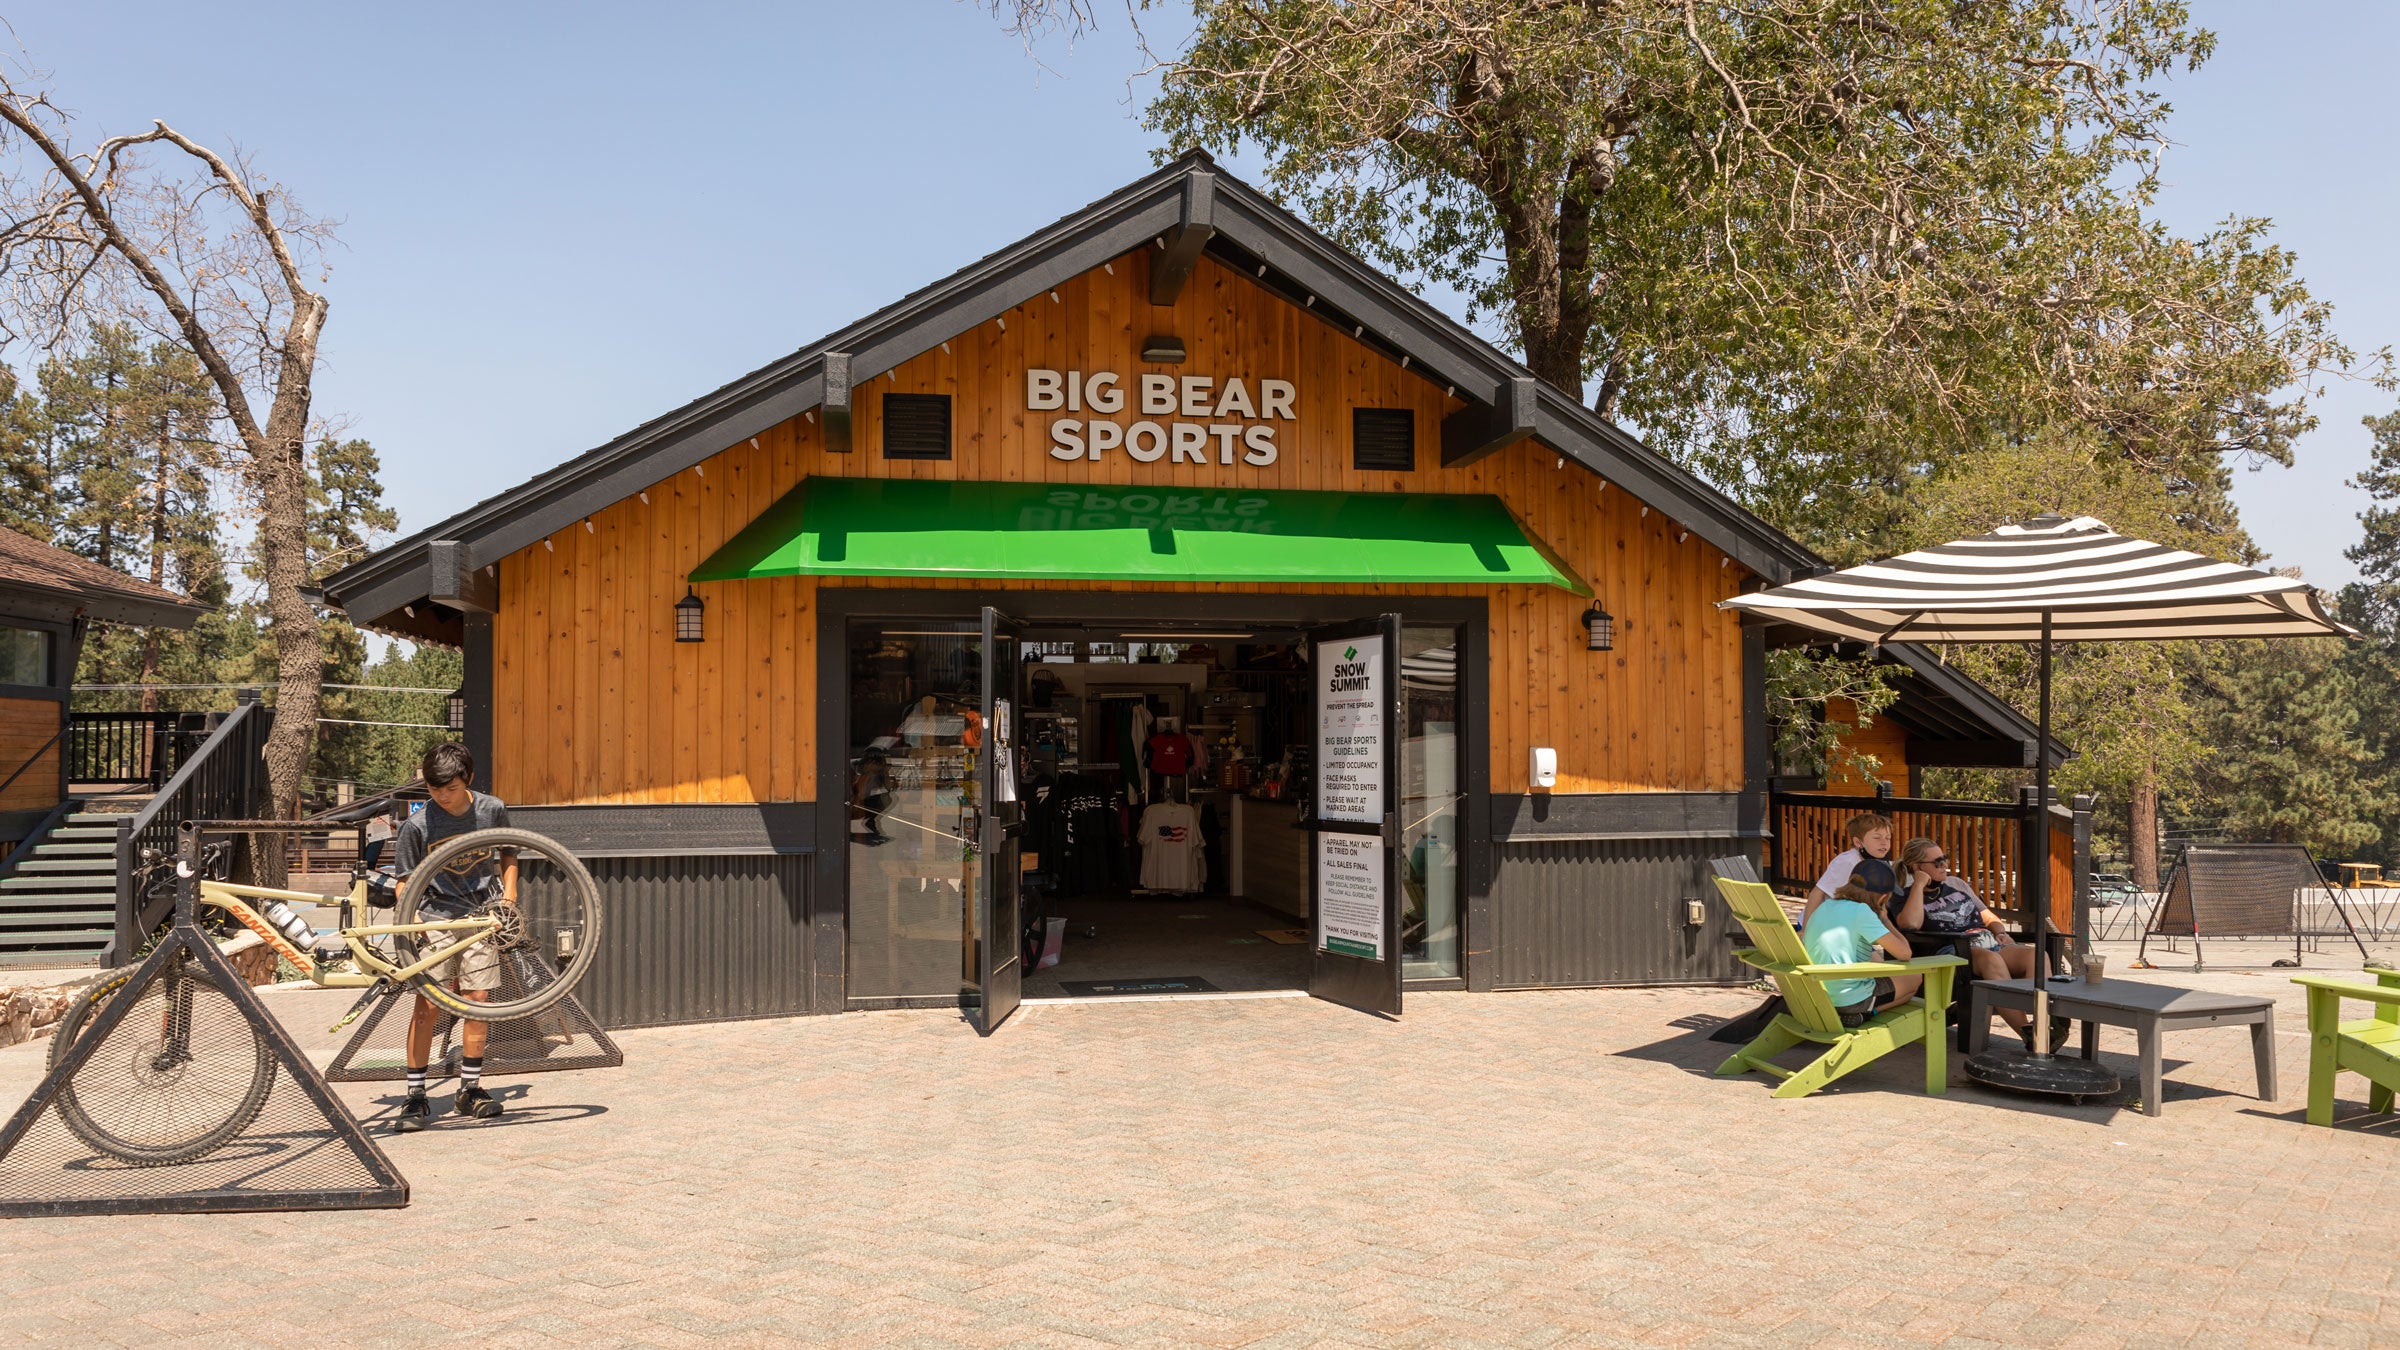 Big Bear Sports at Snow Summit during summer with a mountain biker and family sitting in lounge chairs outside the storefront